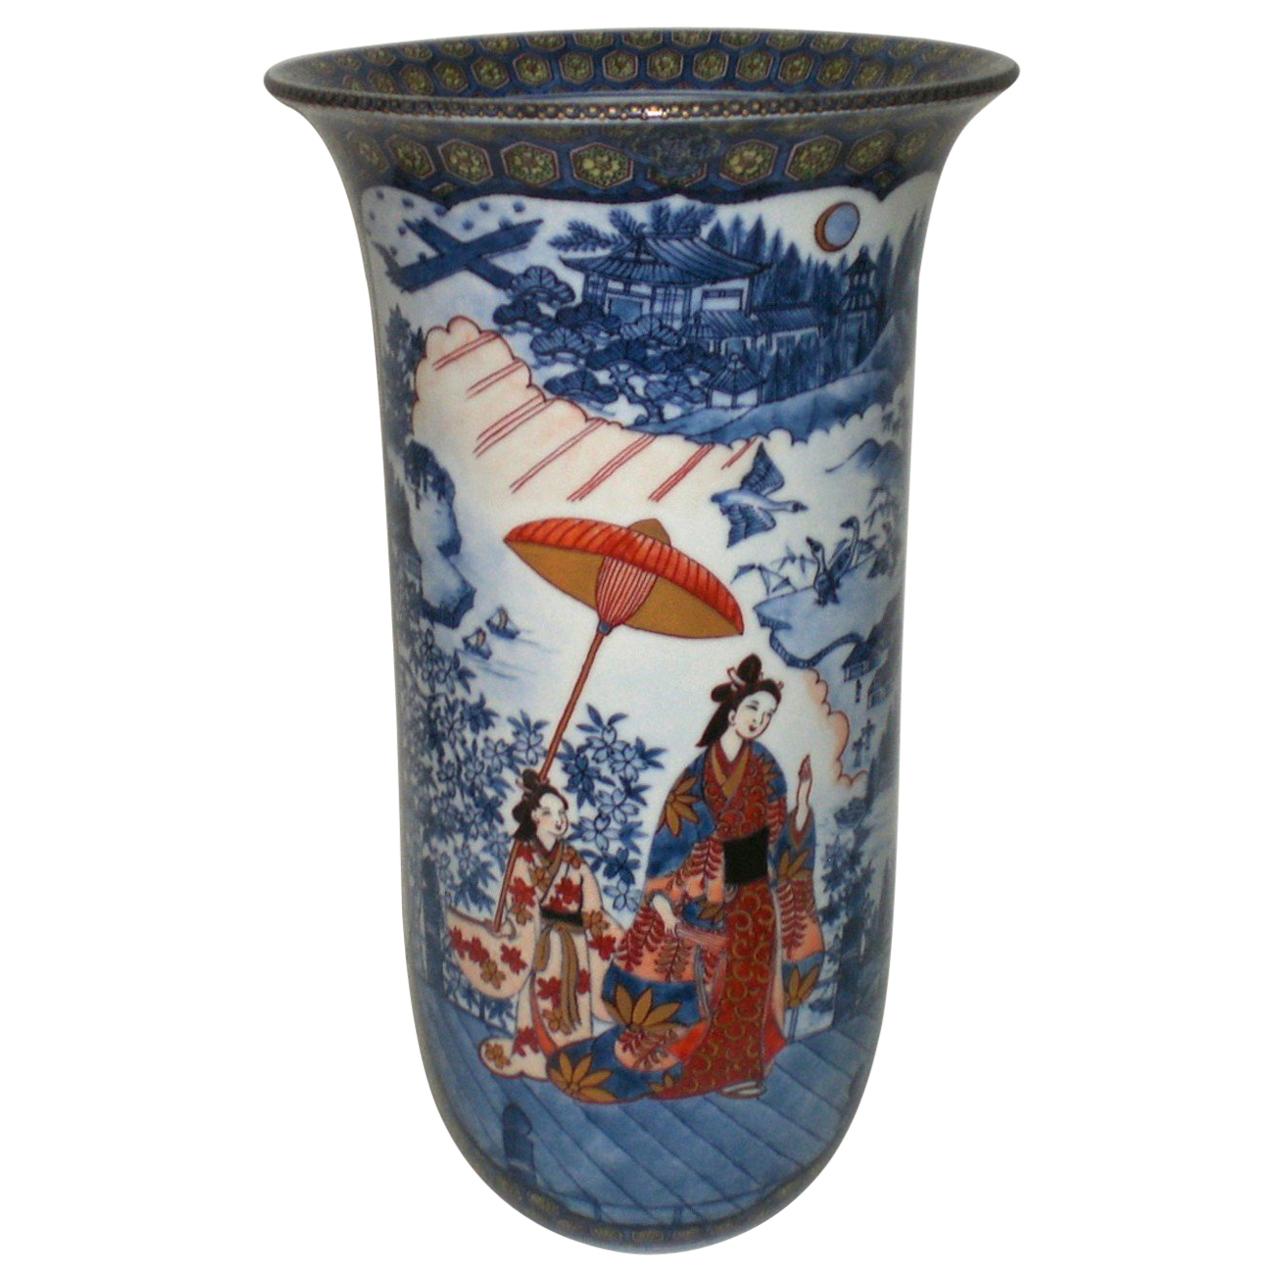 Extraordinary very large Japanese contemporary decorative porcelain vase/centerpiece, extremely intricately hand painted on a tall, stunning cylinder shape porcelain body in red, pink, blue and green, a signed masterpiece by highly acclaimed